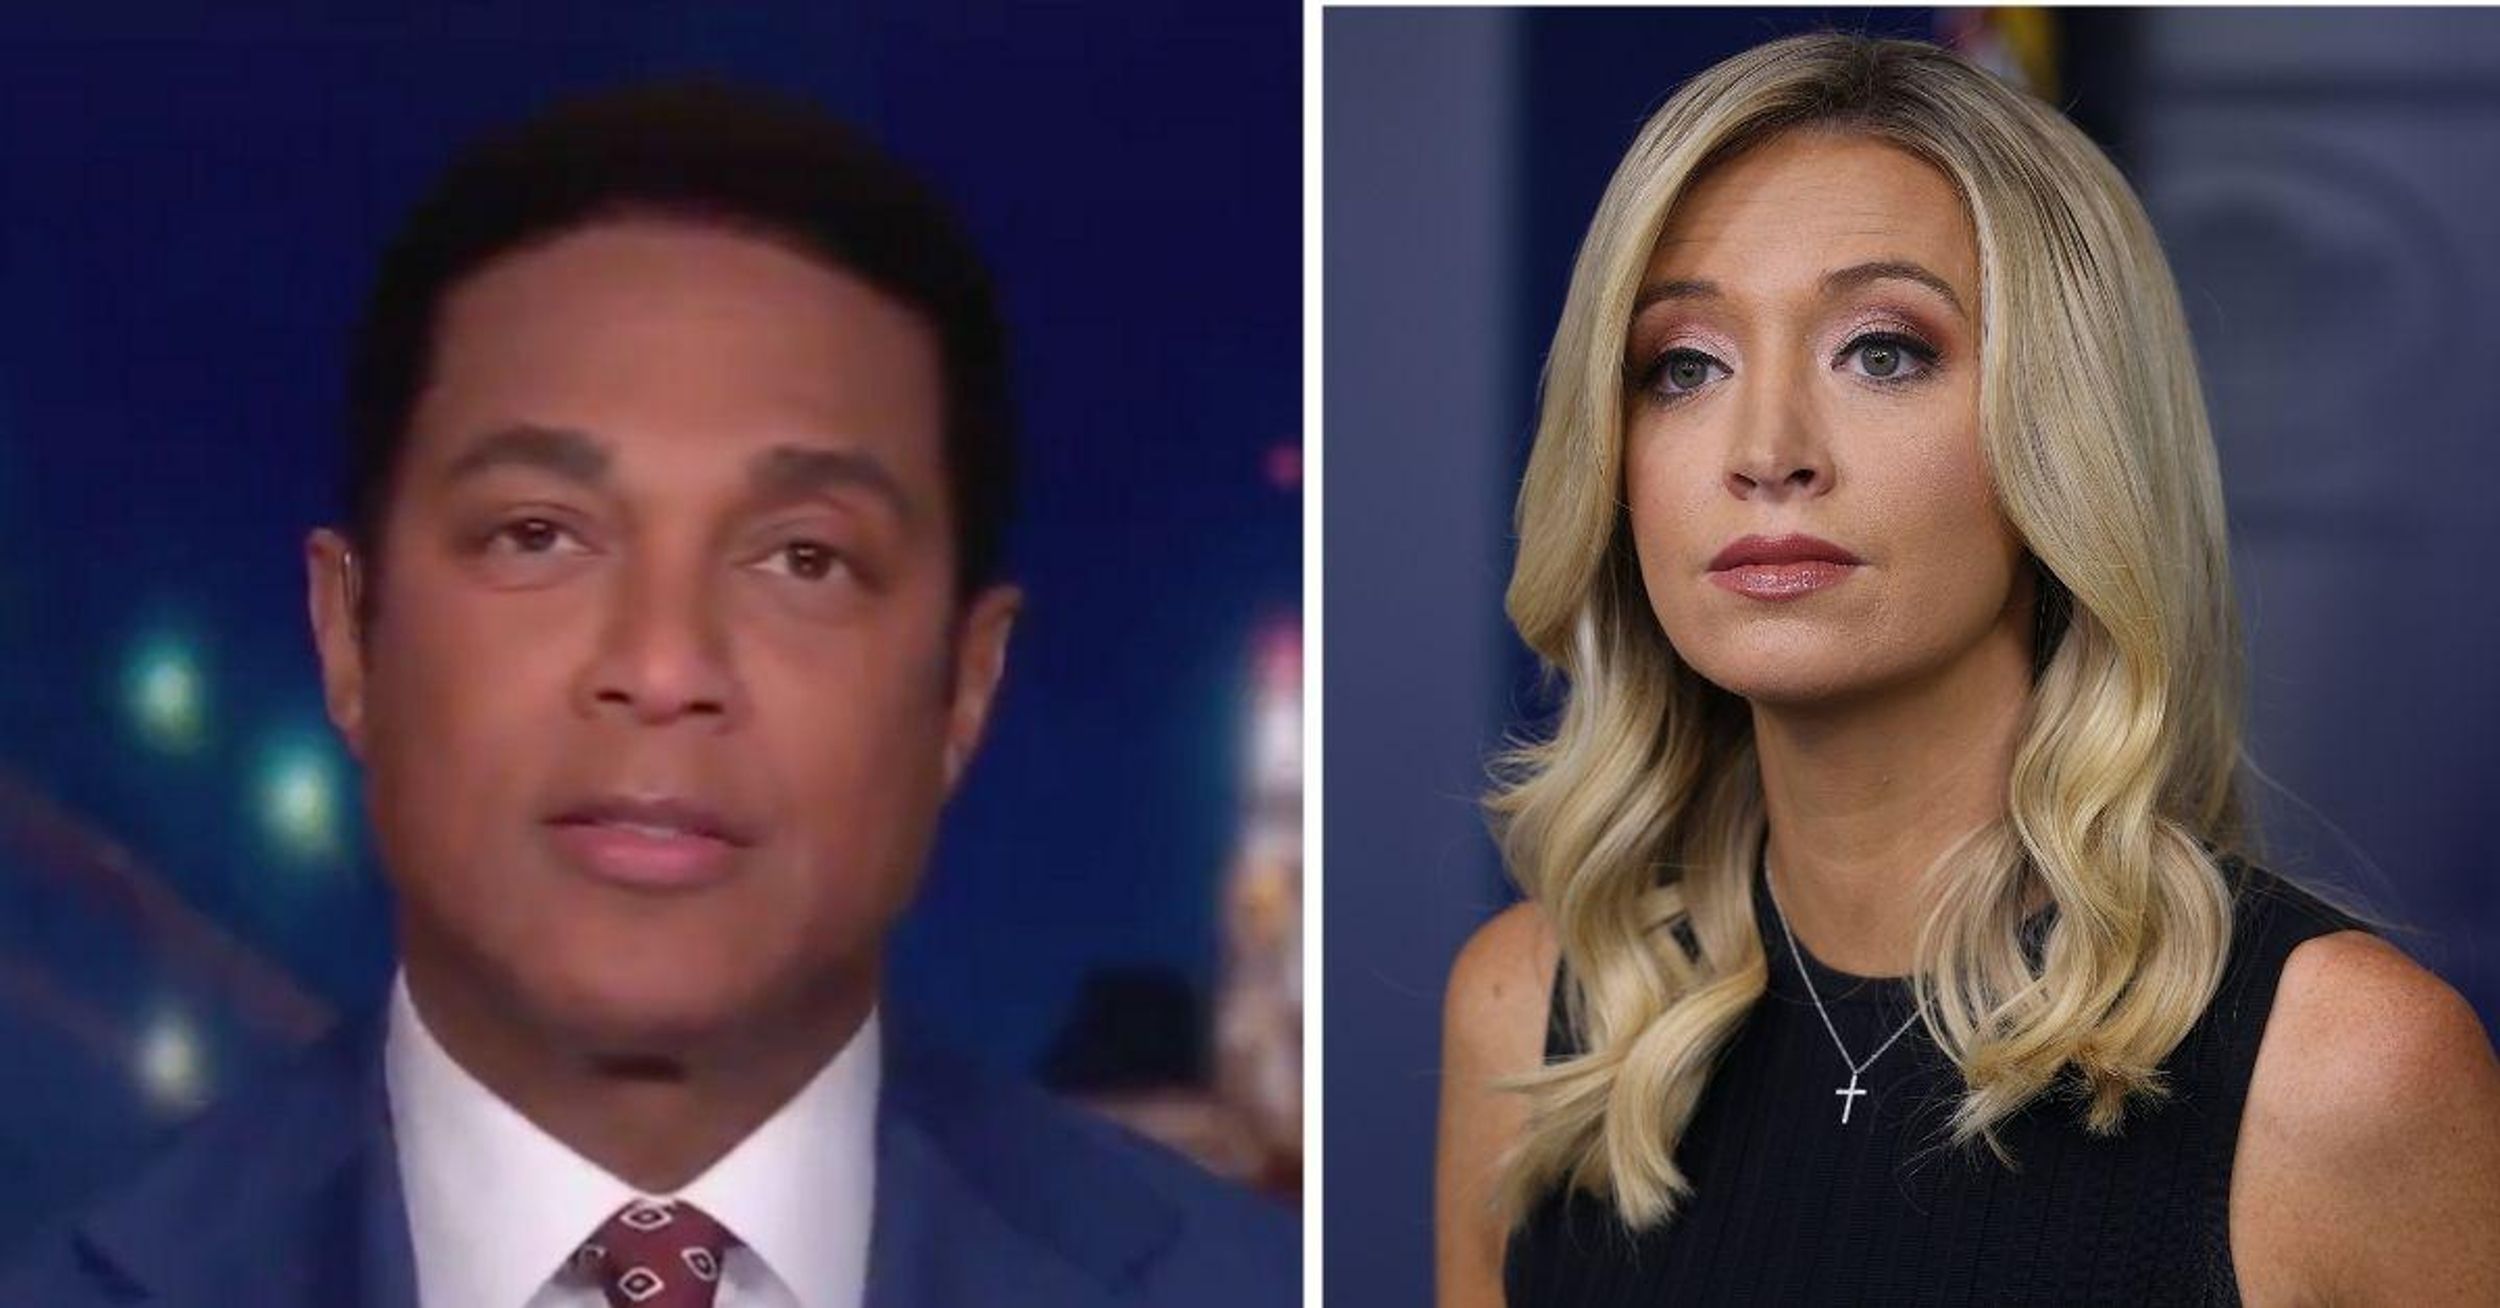 Don Lemon Shows Just How Over Kayleigh McEnany's Attacks On The Media He Is With Blunt Send-Off